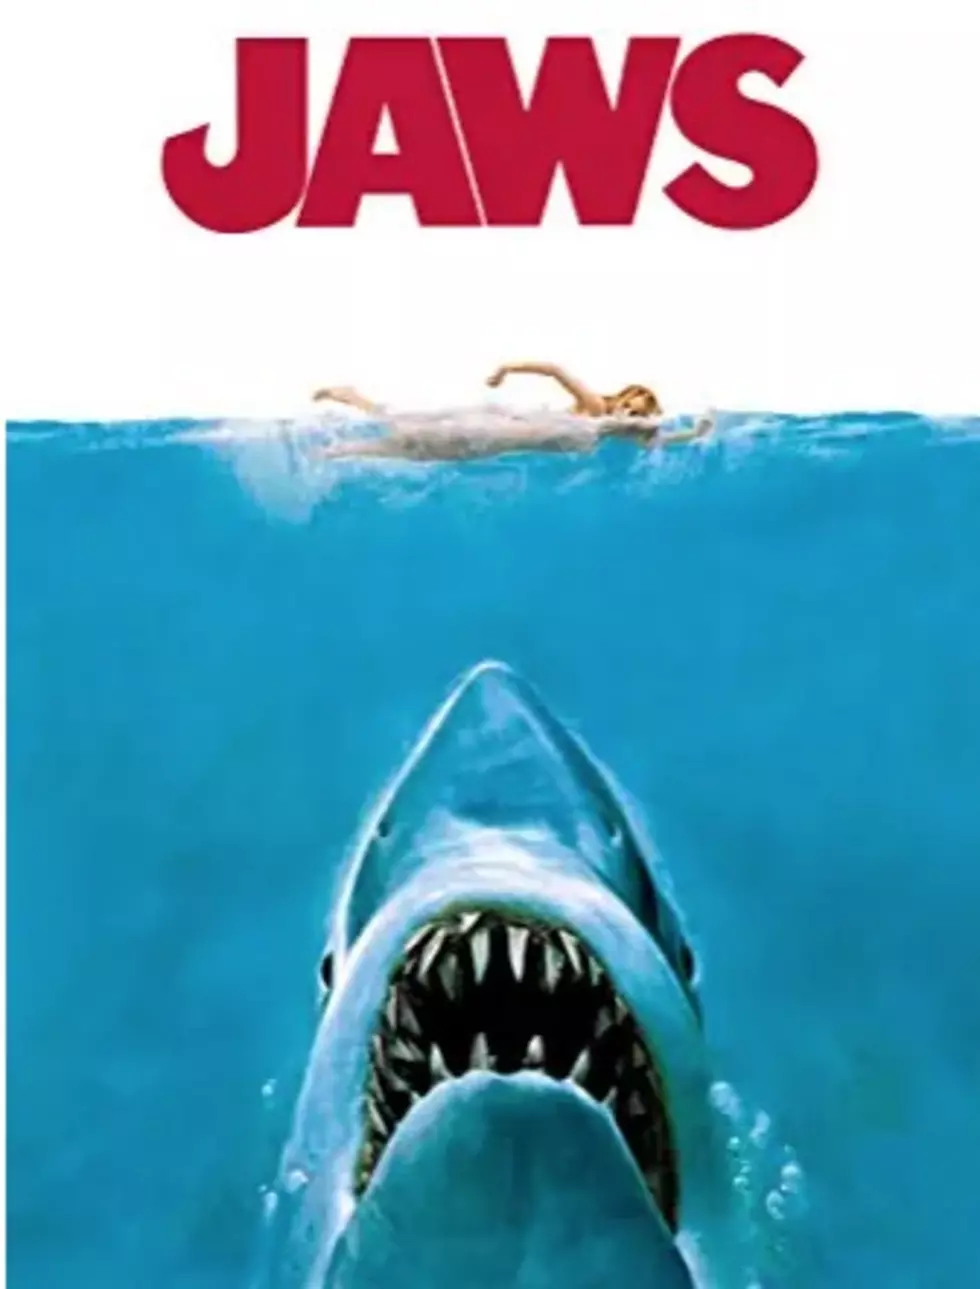 Get Your Weekend Started With Jaws Trivia